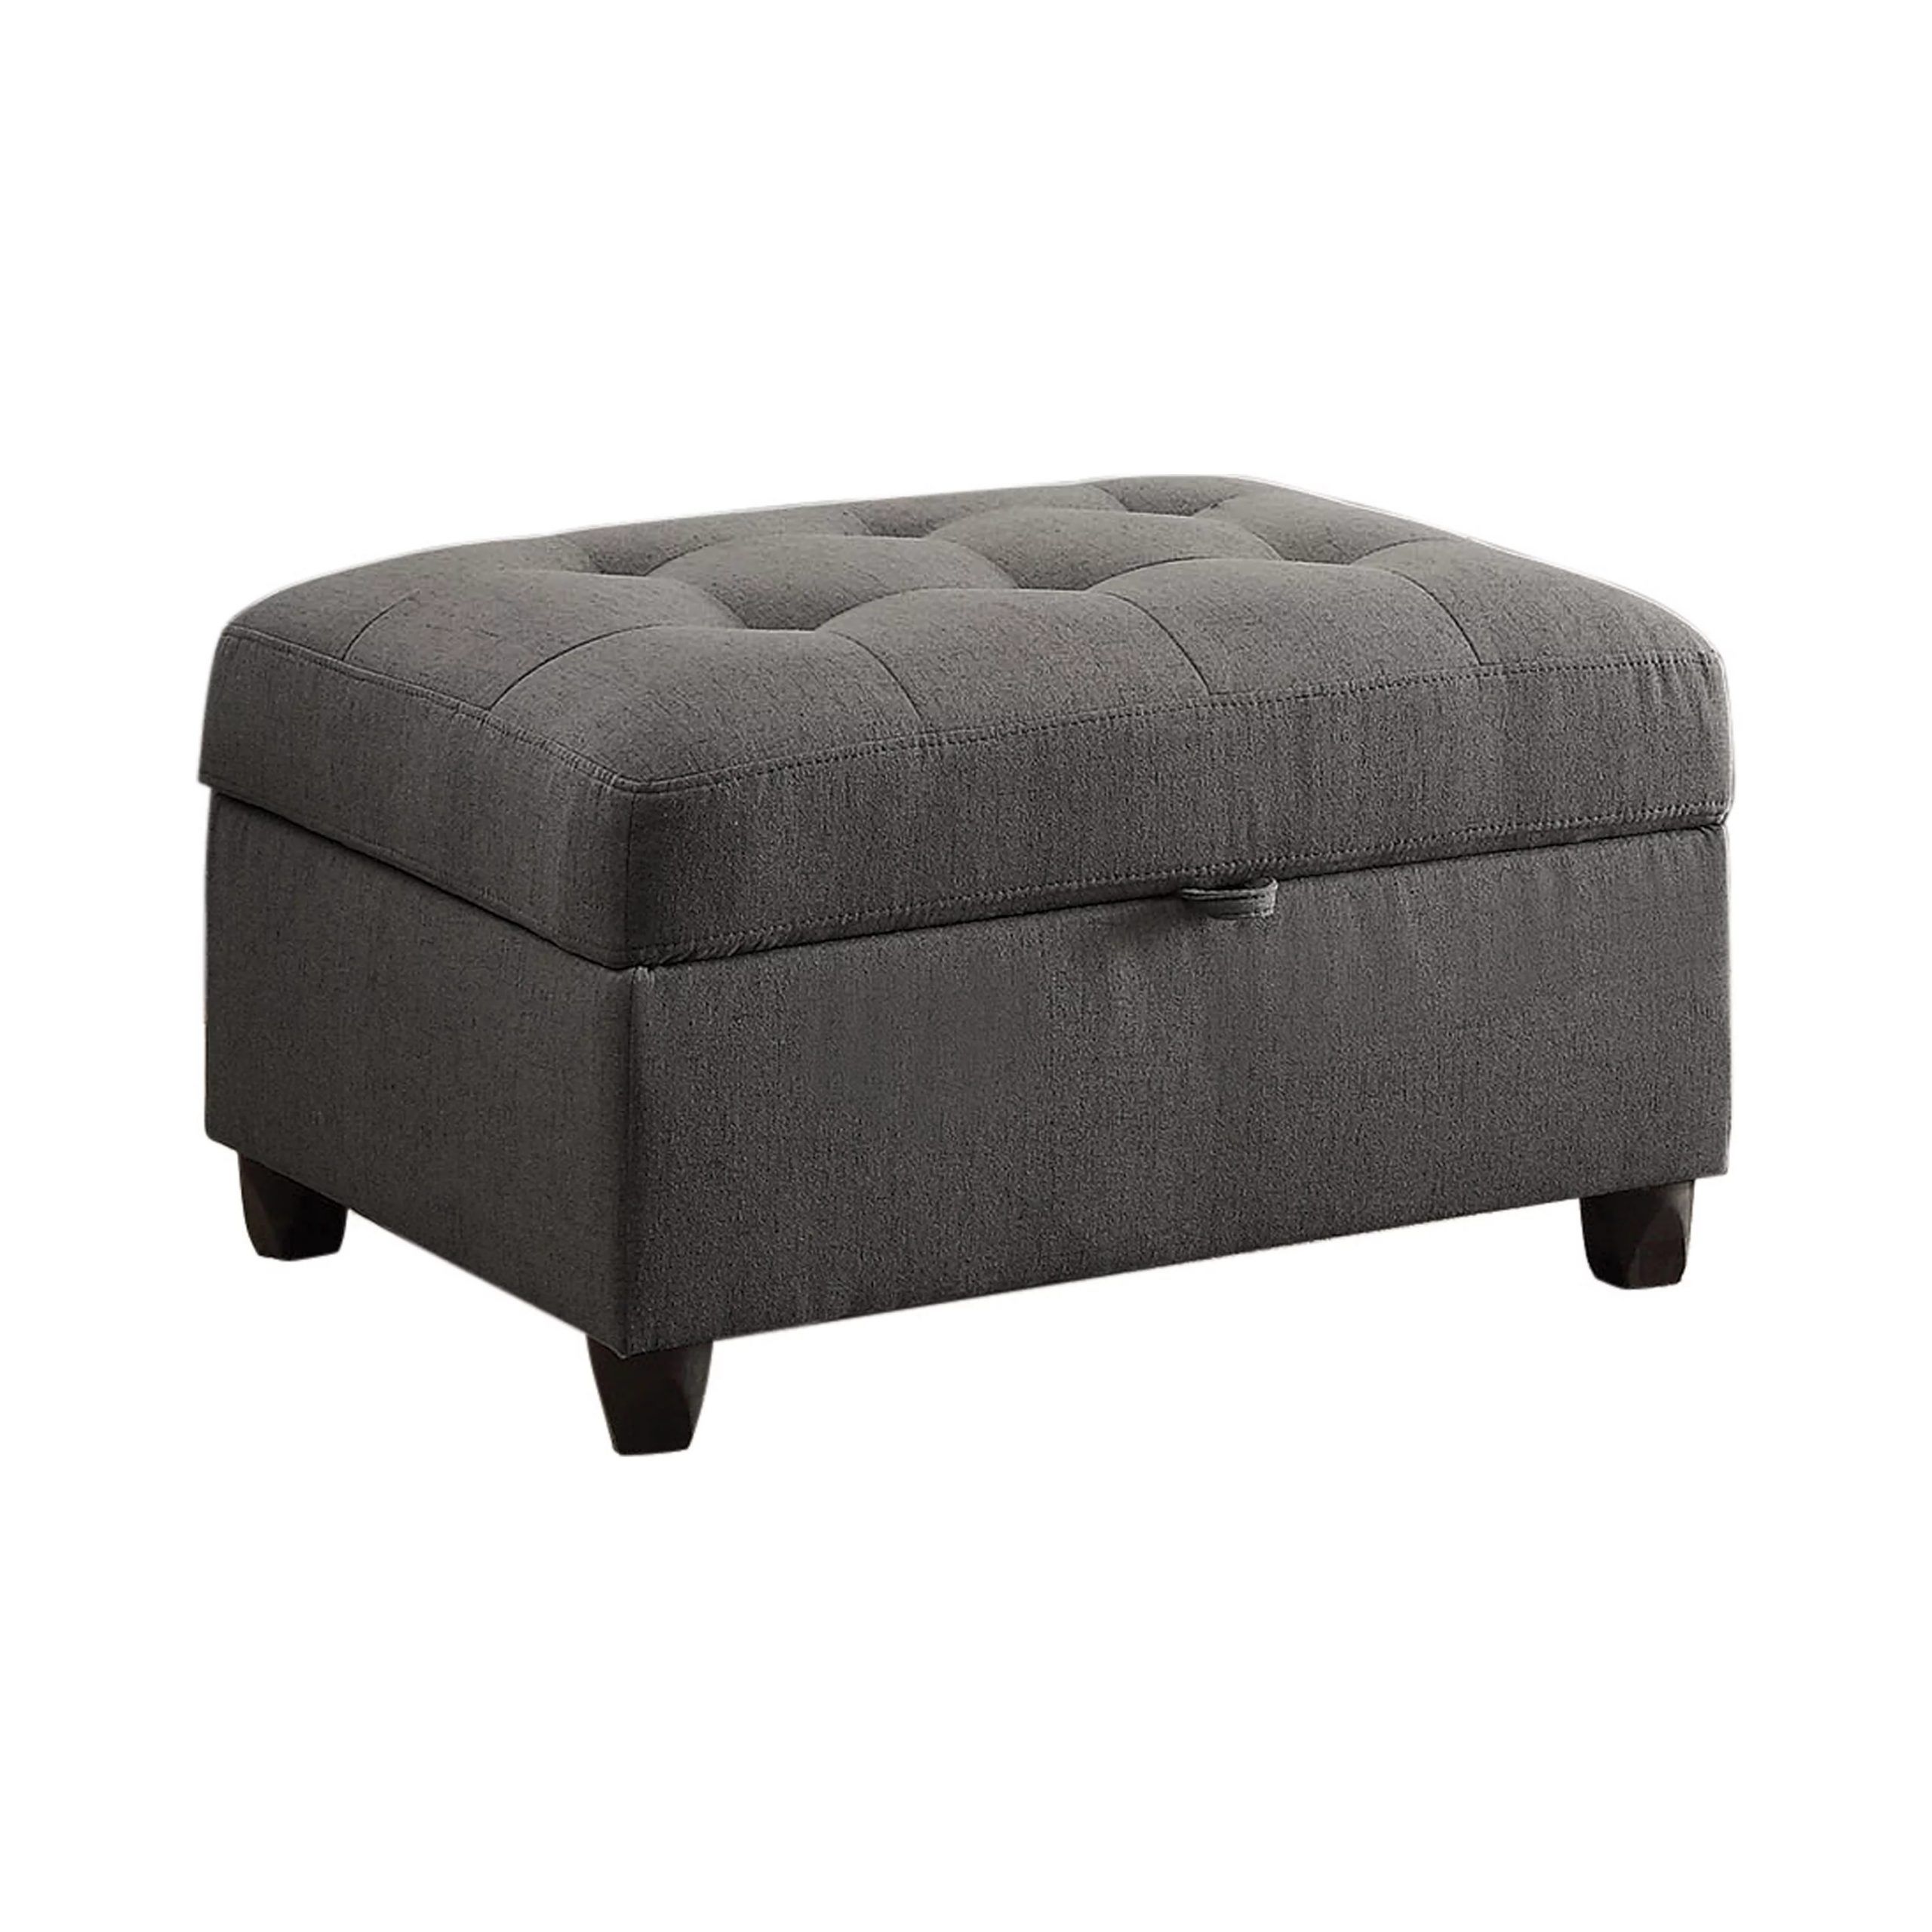 Stonenesse Tufted Storage Ottoman Grey – Walmart – Walmart For Brown And Gray Button Tufted Ottomans (View 3 of 20)